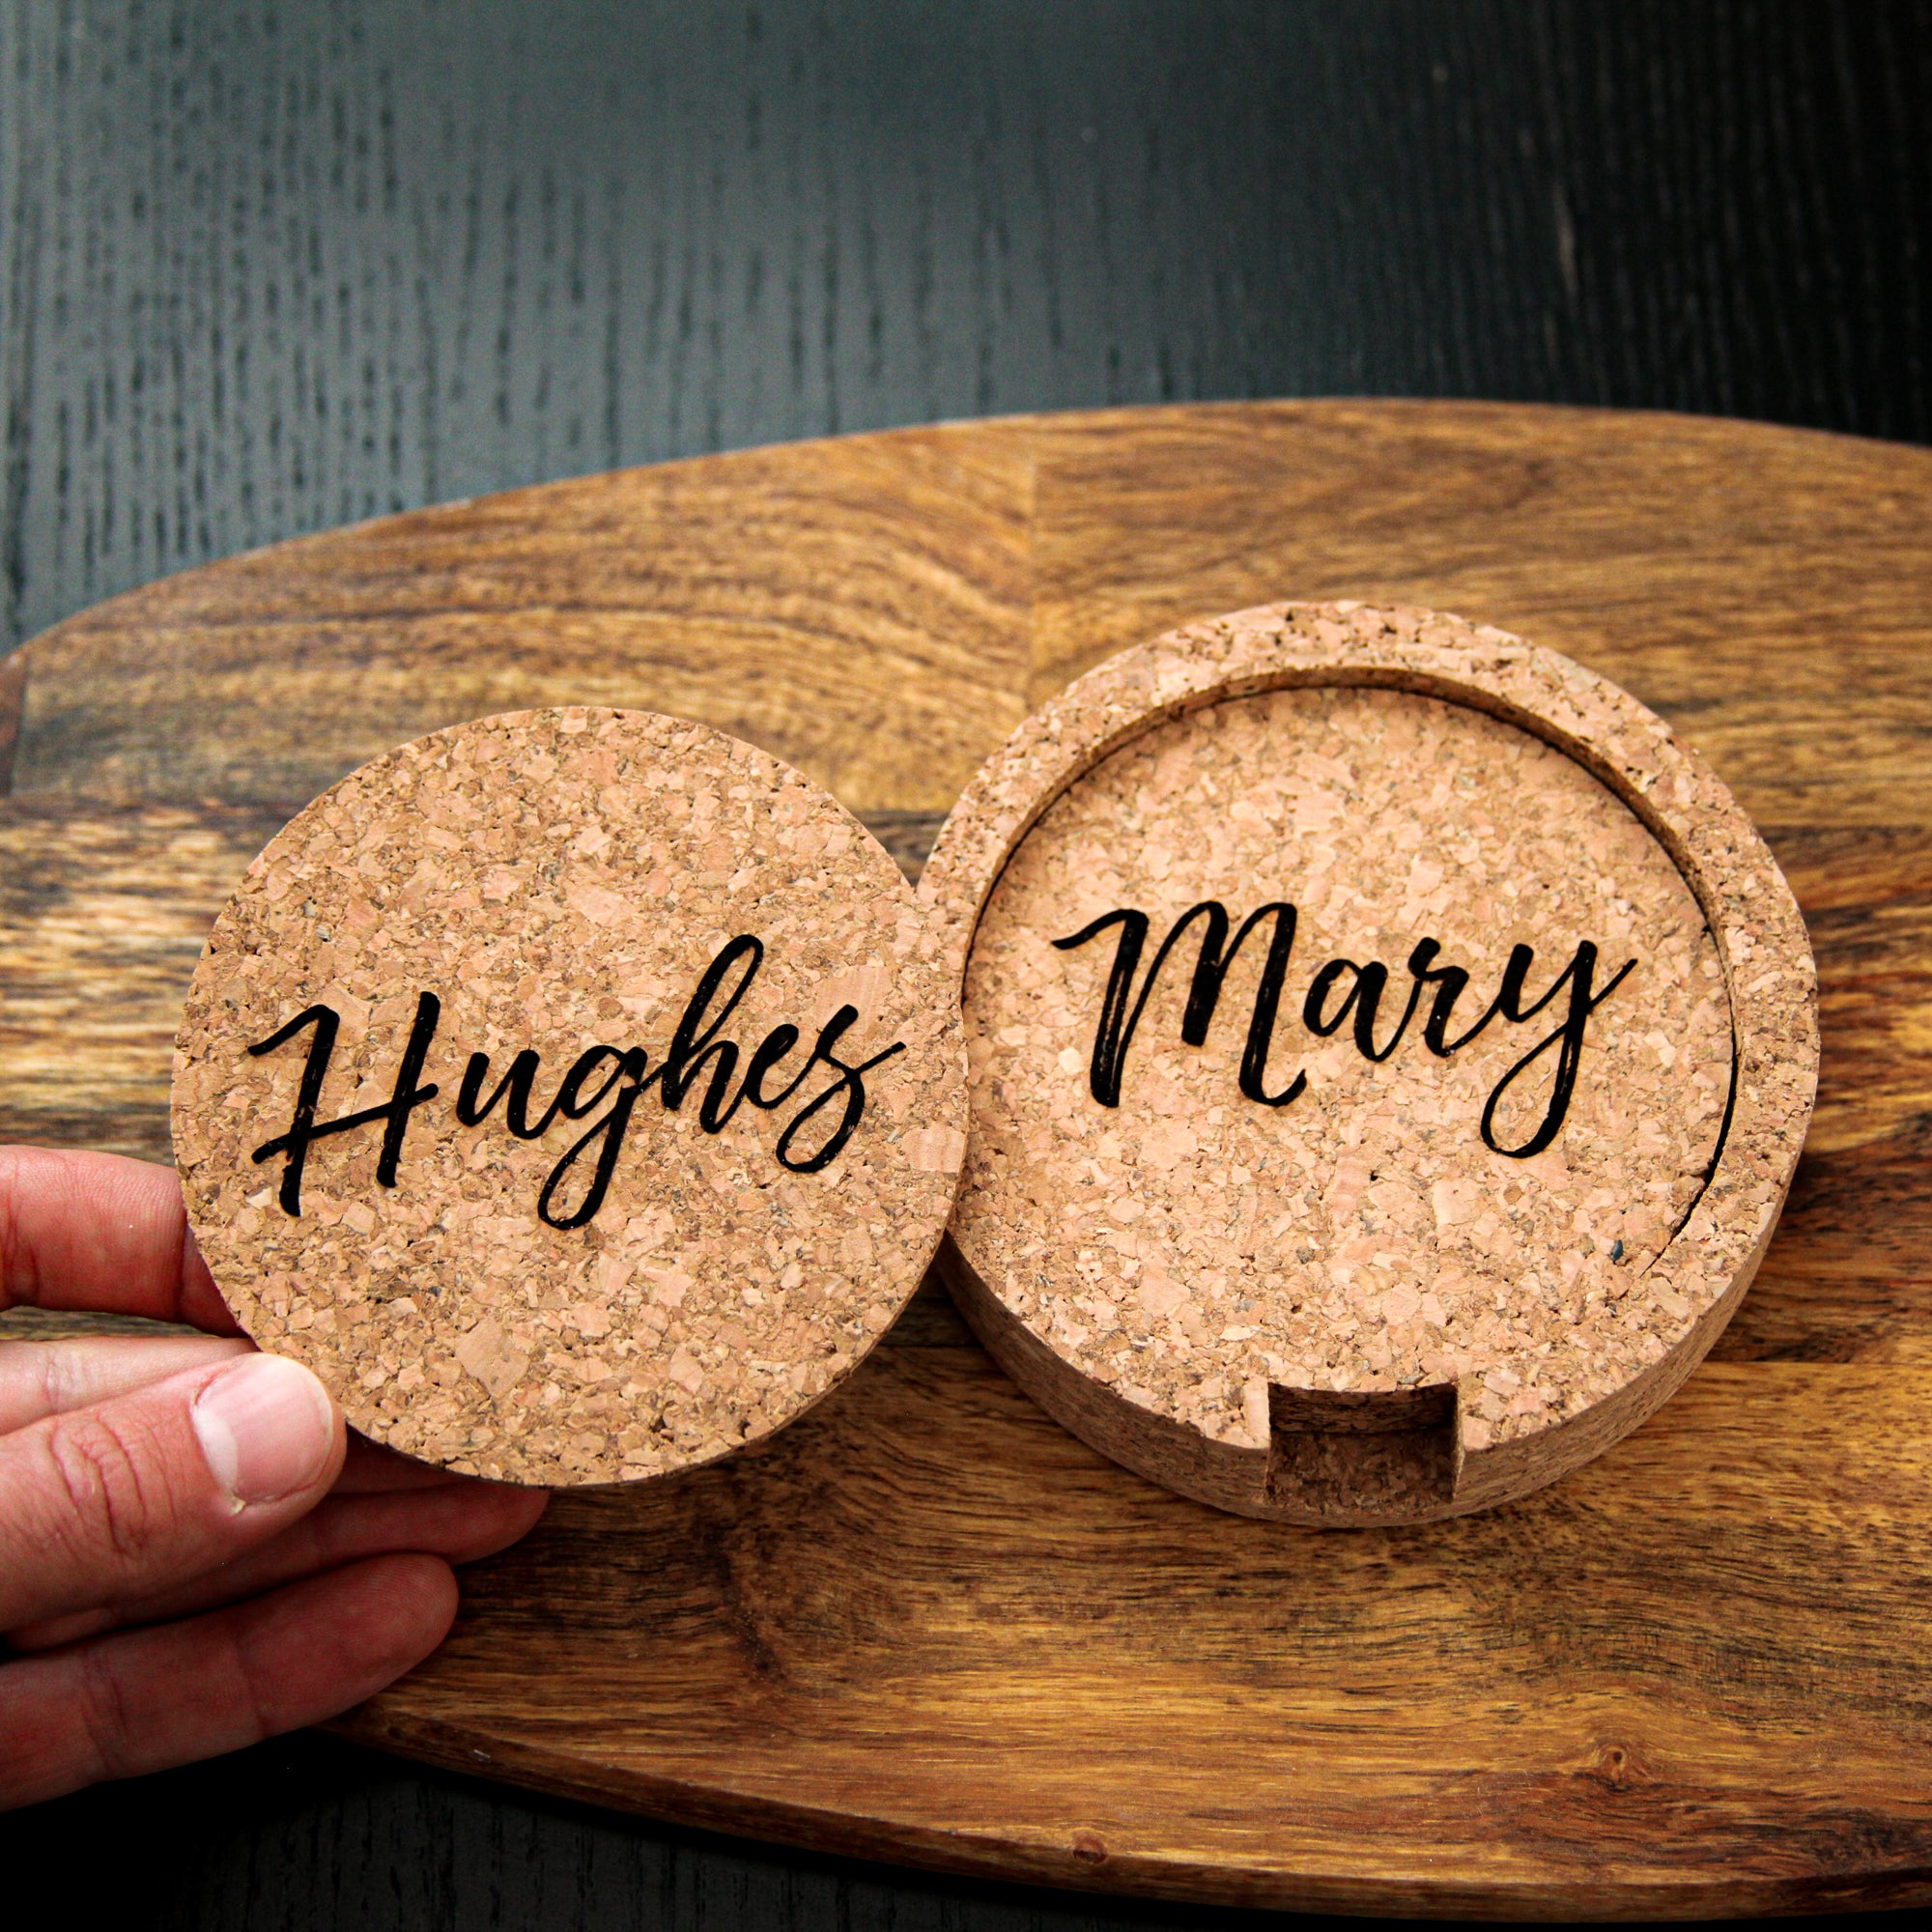 Custom Cork Coasters - Shop Personalized Cork Coasters at Totally  Promotional